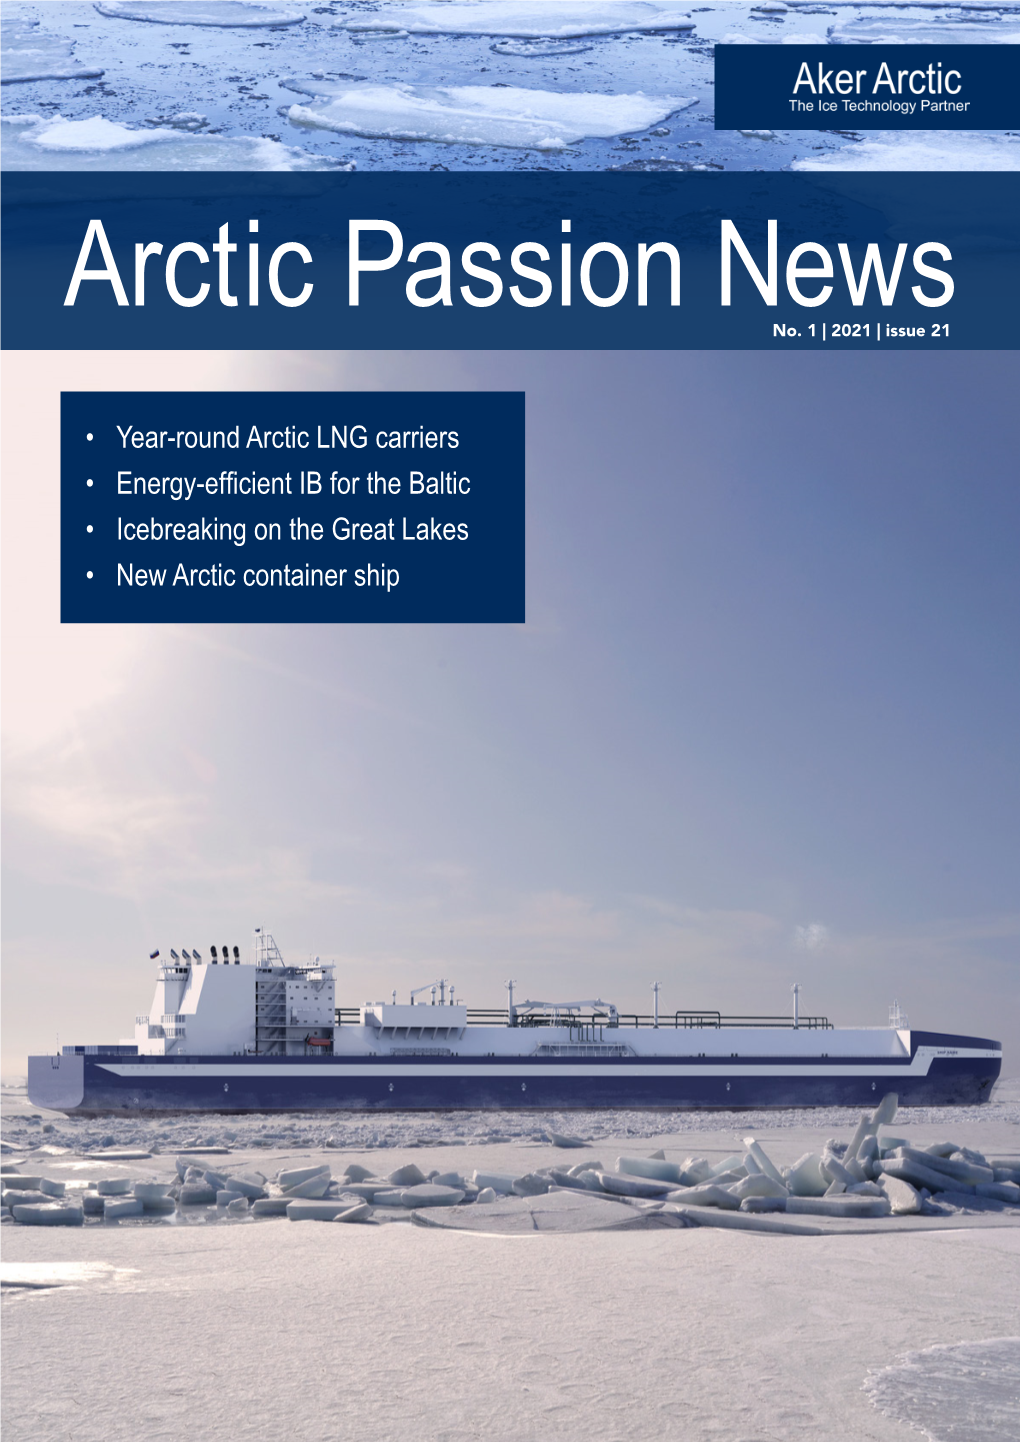 Year-Round Arctic LNG Carriers • Energy-Efficient IB for the Baltic • Icebreaking on the Great Lakes • New Arctic Container Ship in This Issue